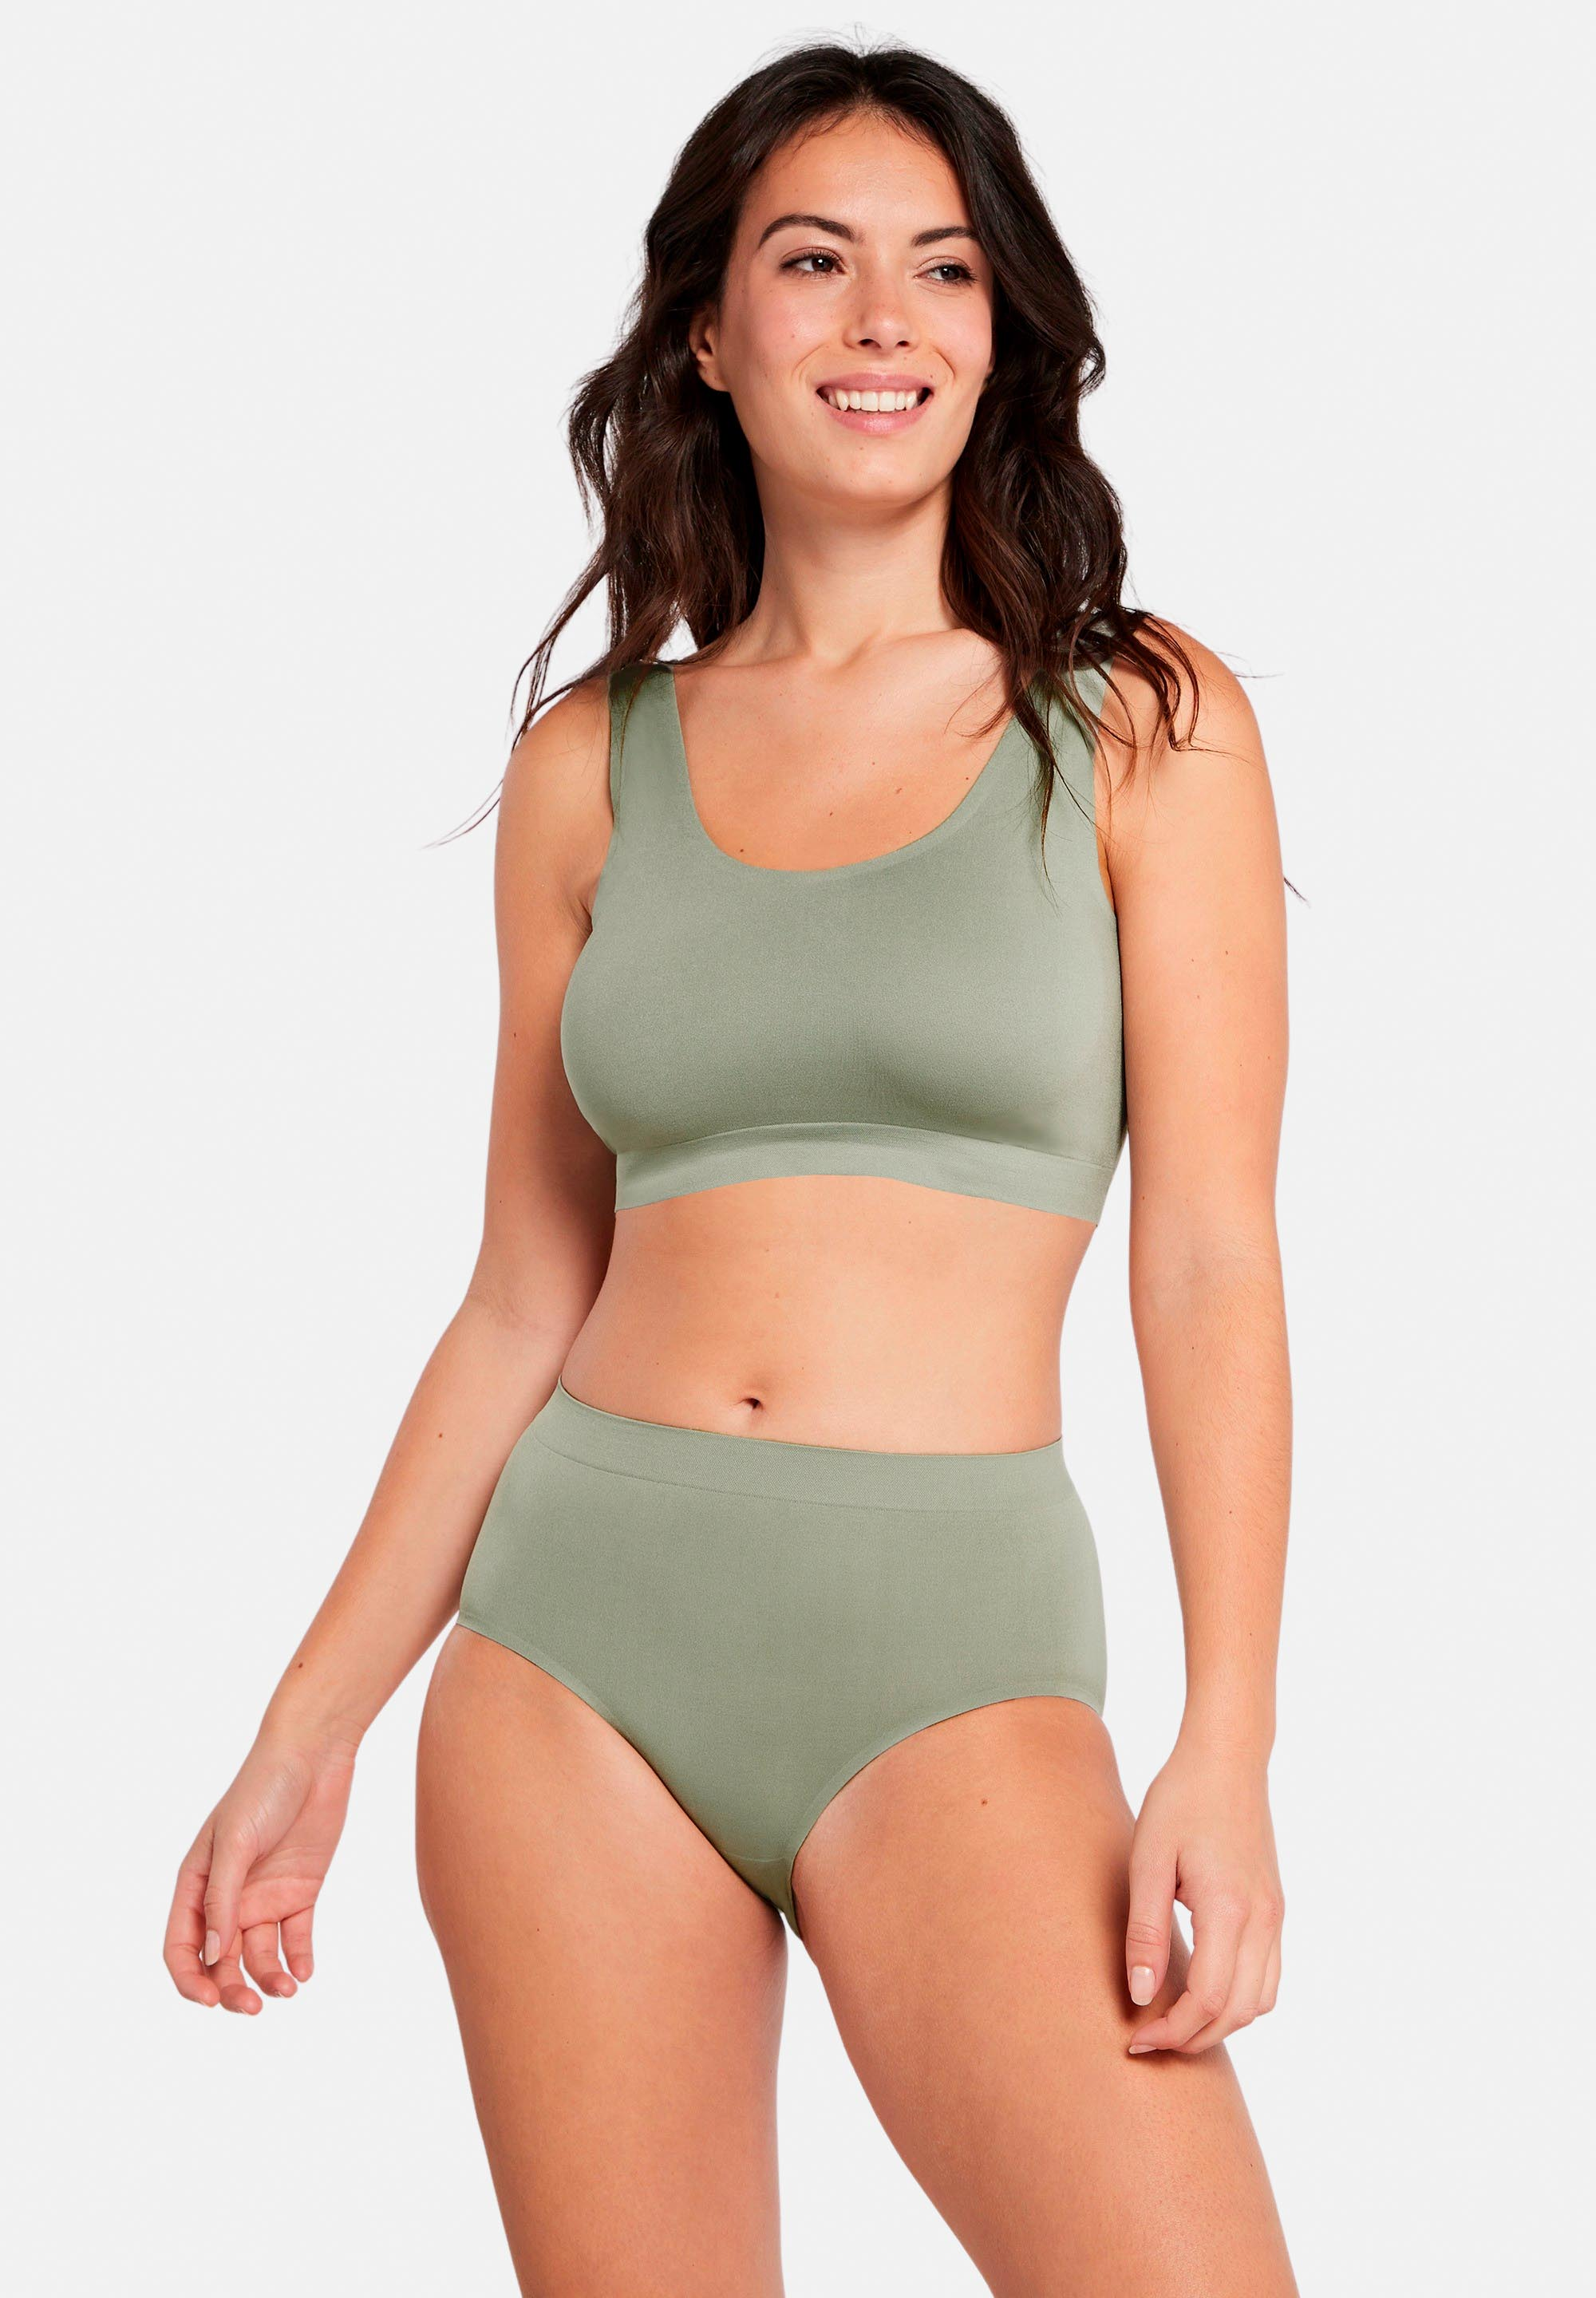 So Confort high-waisted panties Green Ombré